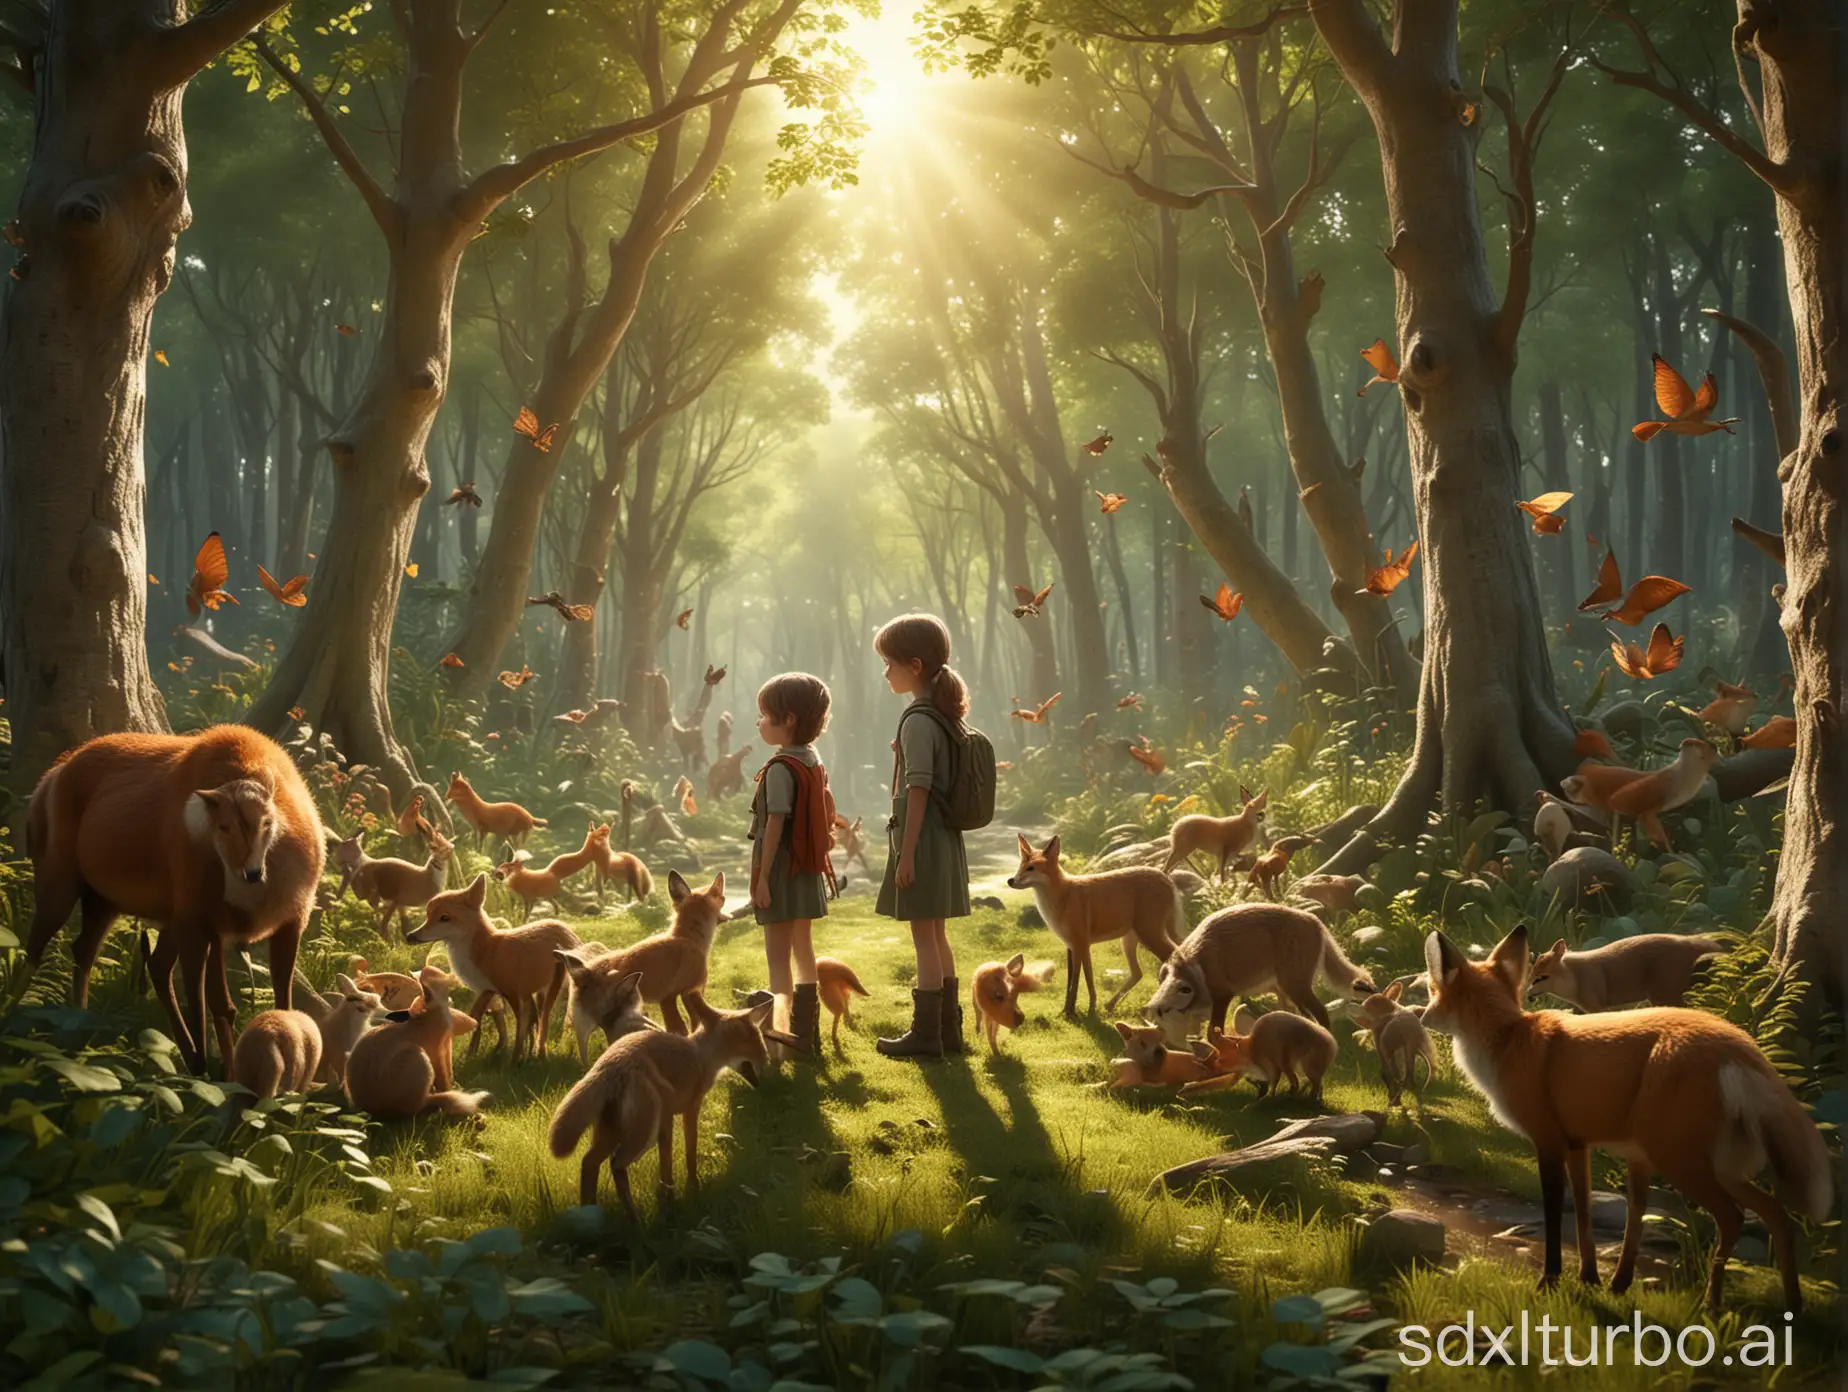 A captivating 3D render of a diverse group of children and forest animals, all united within a lush, verdant forest. The children tenderly interact with the enchanting creatures, fostering bonds of trust and love. A young girl is nuzzled by a gentle deer, while a curious fox observes a boy. Playful creatures, including rabbits, squirrels, and birds, engage with the kids, creating an atmosphere of unity between nature and humanity. Sunlight filters through the trees, casting a warm, inviting glow that enhances the heartwarming scene. The illustration masterfully combines typography, 3D render, and traditional art techniques, creating a captivating and memorable visual experience, perfect for a poster or illustration. The scene exudes a cinematic quality that transports viewers into a magical world where humans and animals coexist in harmony, illustration, photo, 3d render, cinematic, poster, aspect ratio 16:9